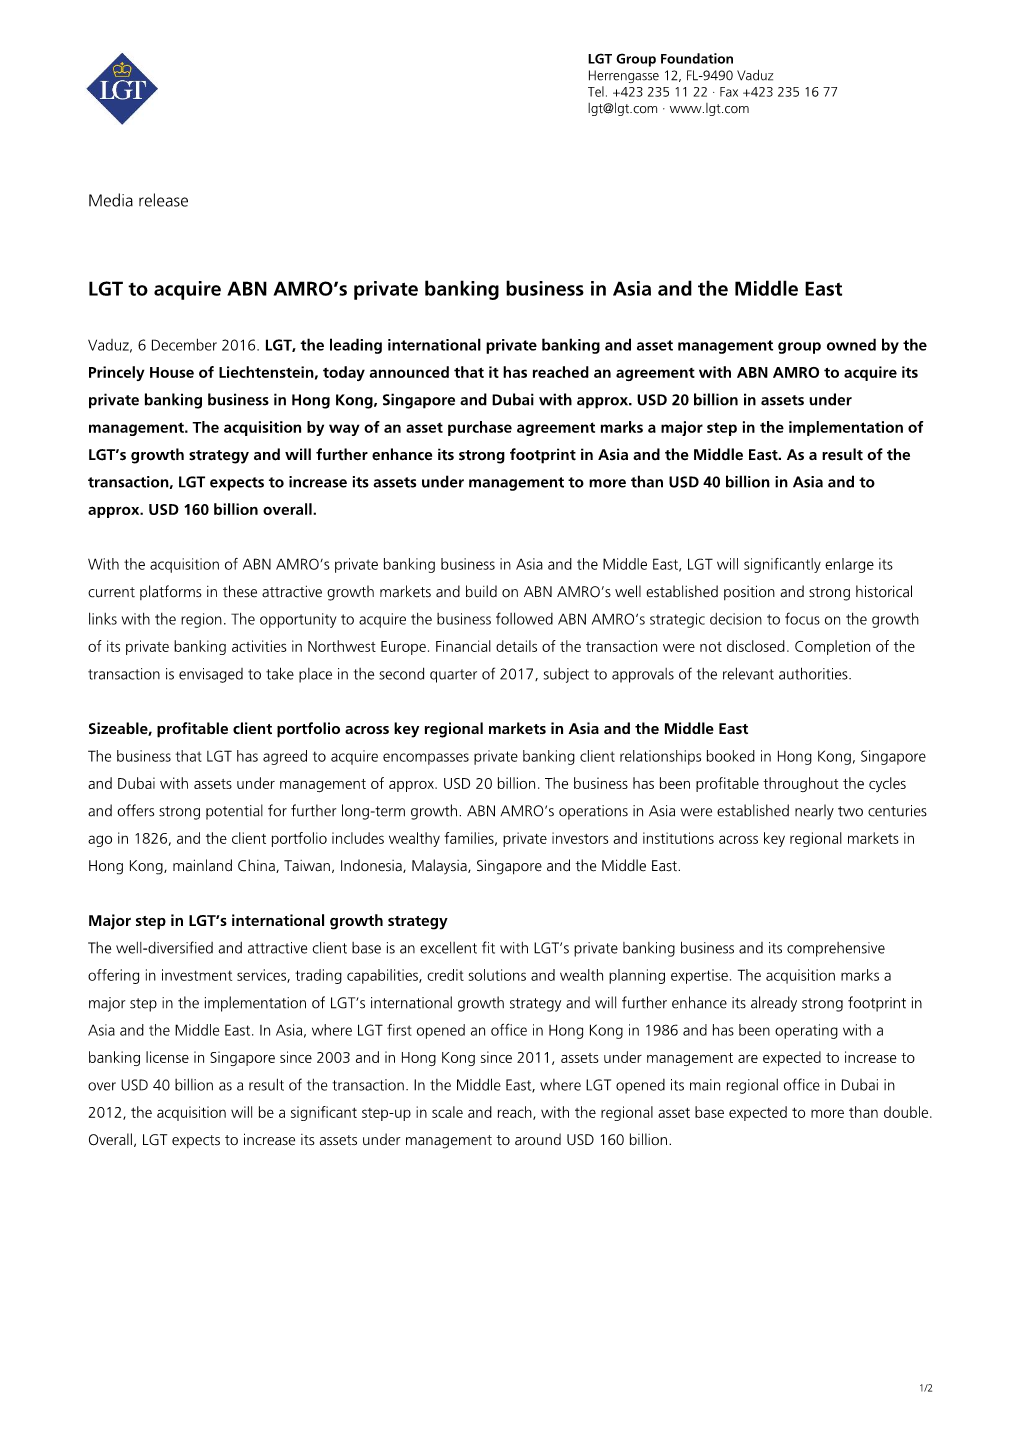 LGT to Acquire ABN AMRO's Private Banking Business in Asia and The